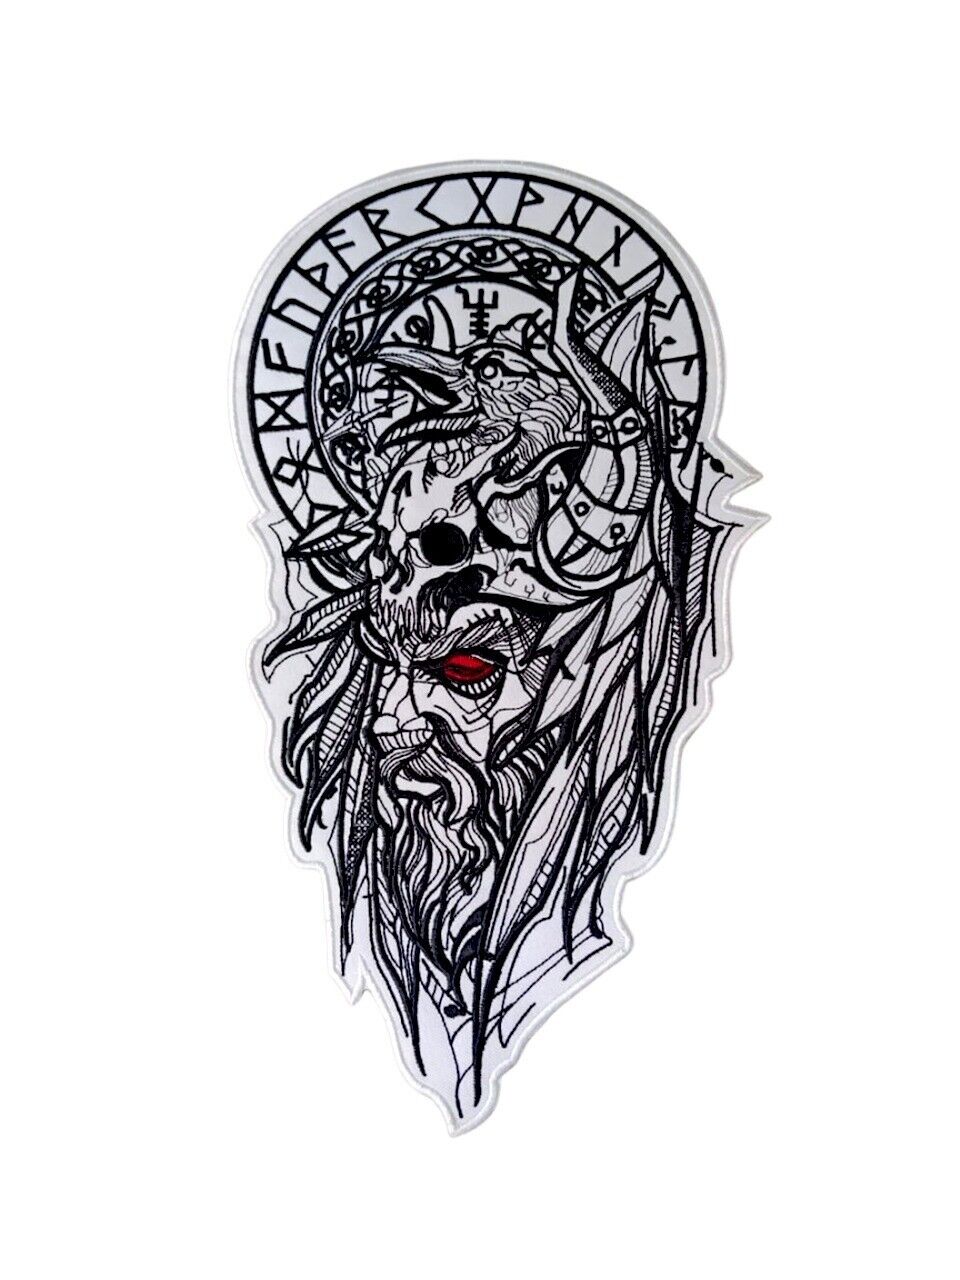 Odin Wotan Nordic Viking Valhalla Large Embroidered Iron On Patch for Vest